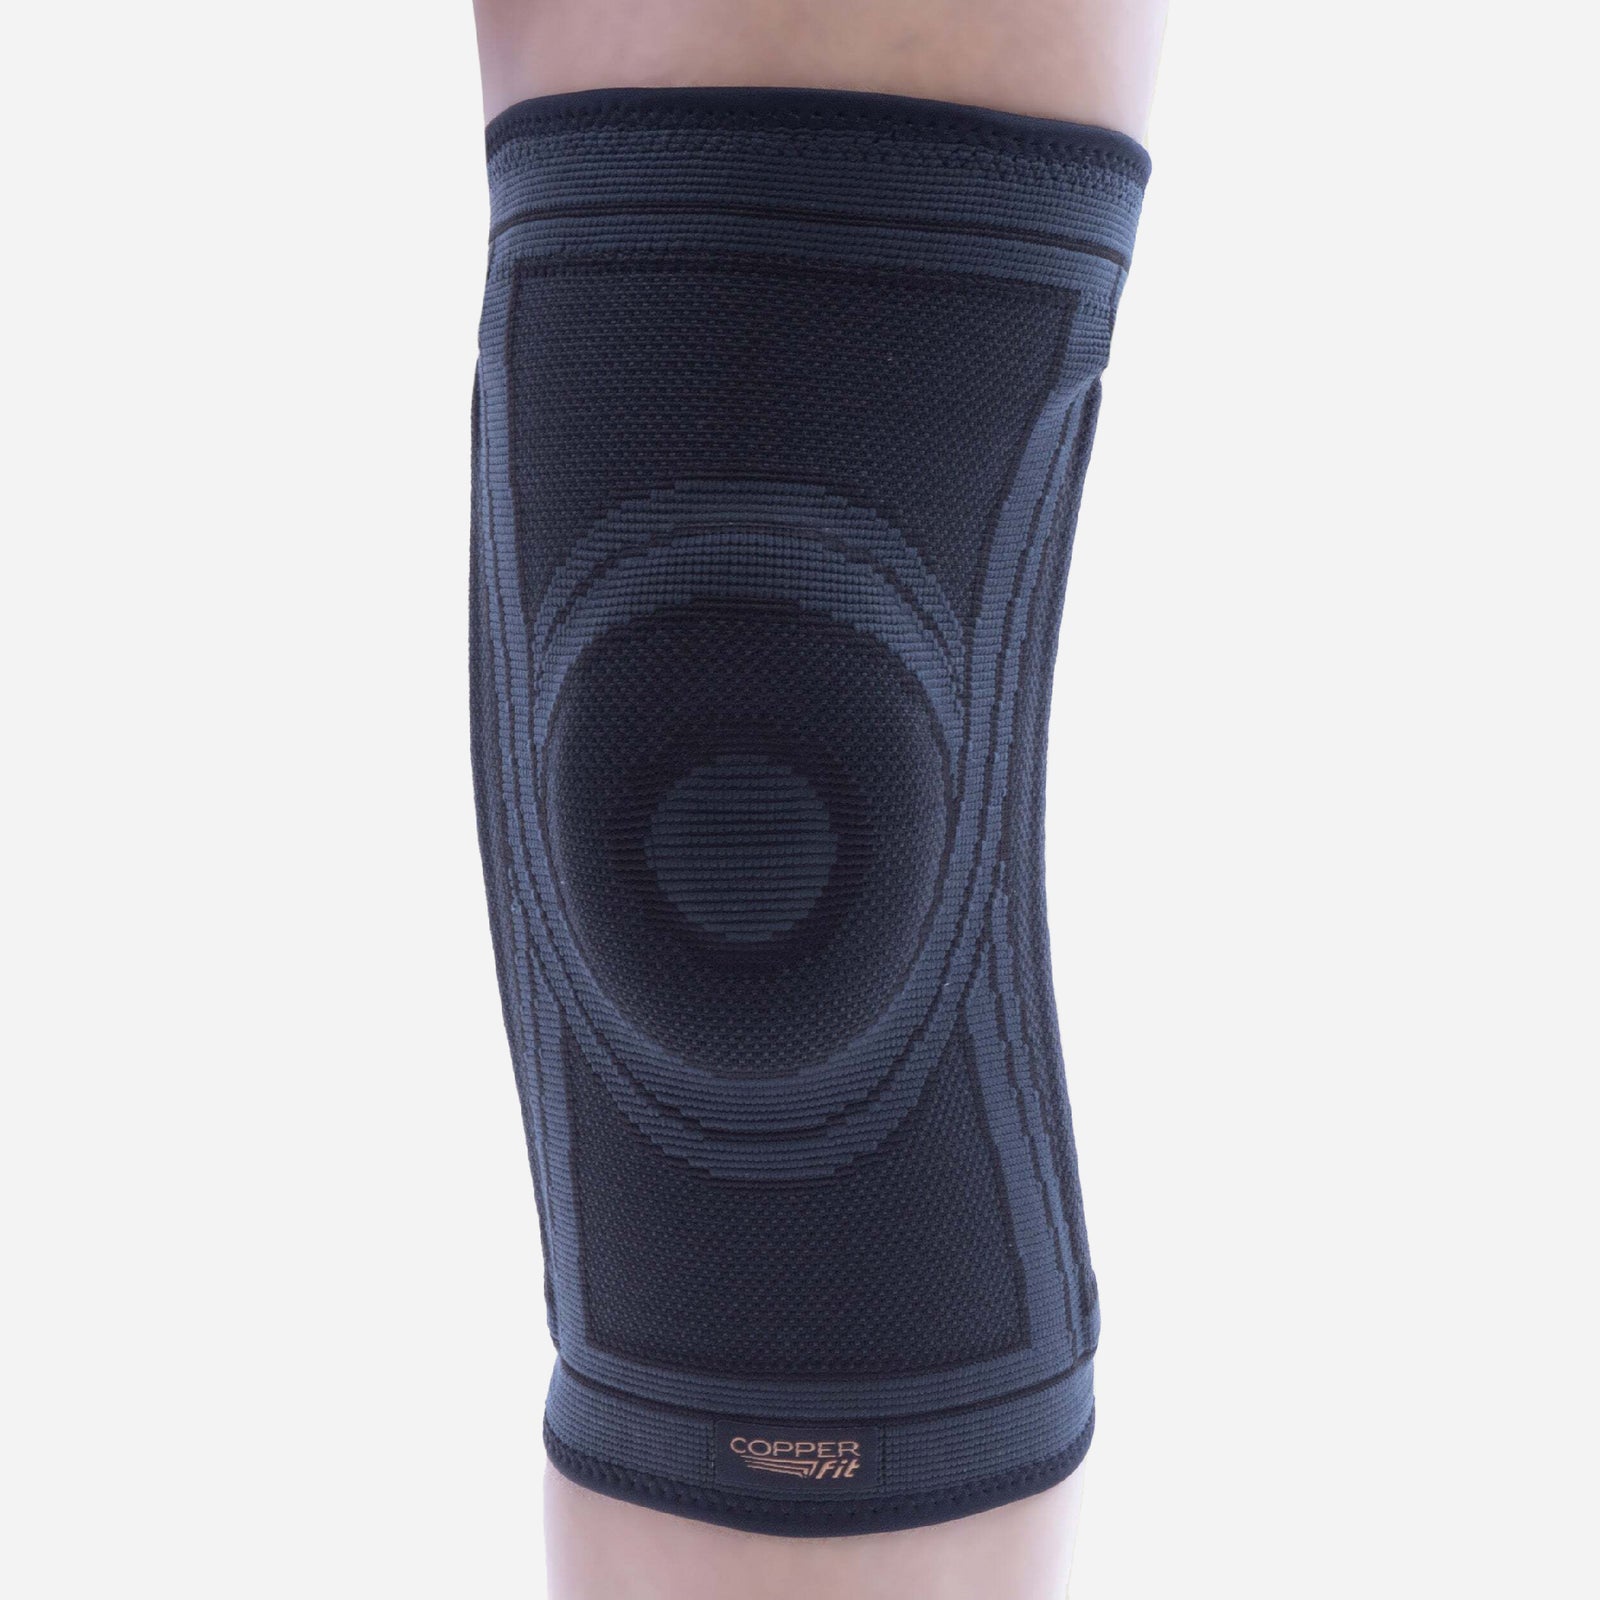 Extreme Fit Copper Breathable Recovery Knee Support Brace Sleeve for Pain  Relief Lifting, Walking, Standing. Warehouse Work at Tractor Supply Co.